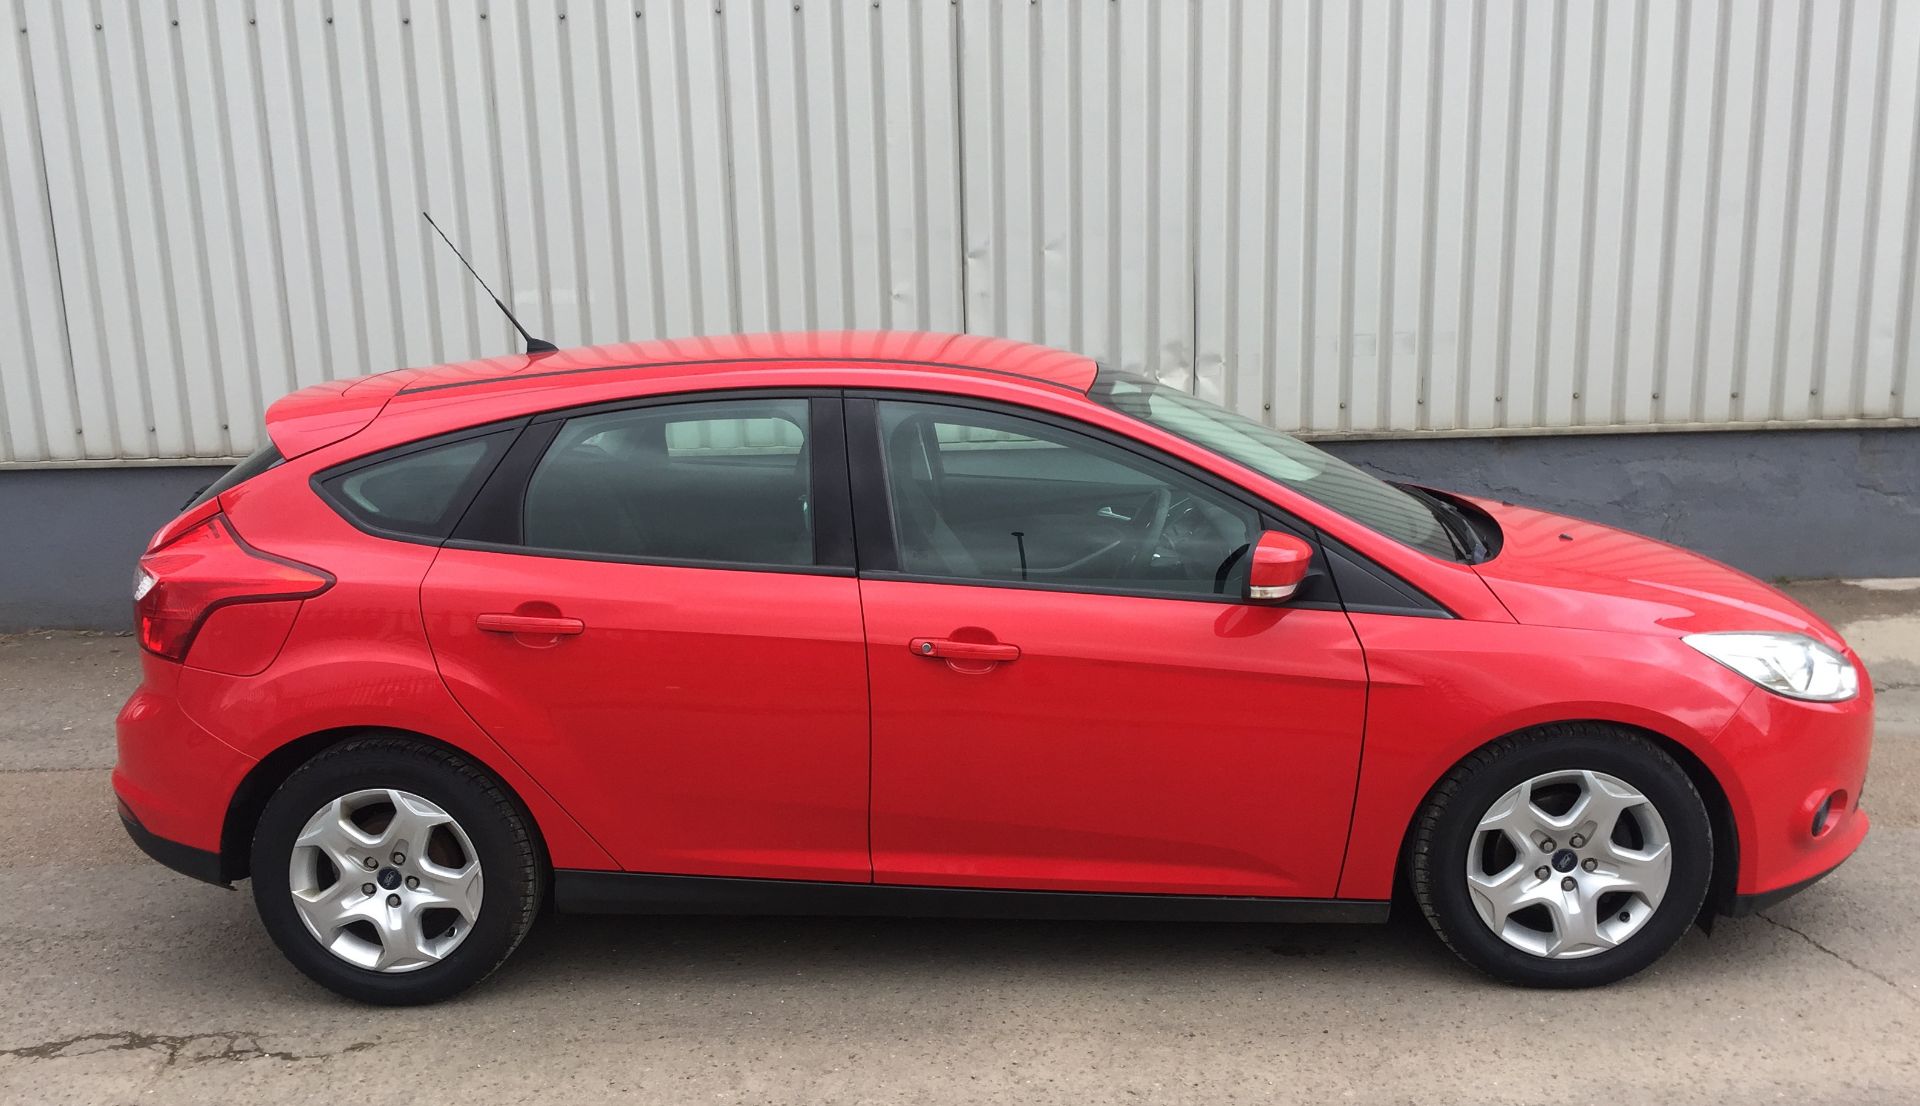 2012 Ford Focus 1.6 TDCi Edge 5 Door Hatchback - CL505 - NO VAT ON THE HAMMER - Location: Corby, - Image 3 of 18